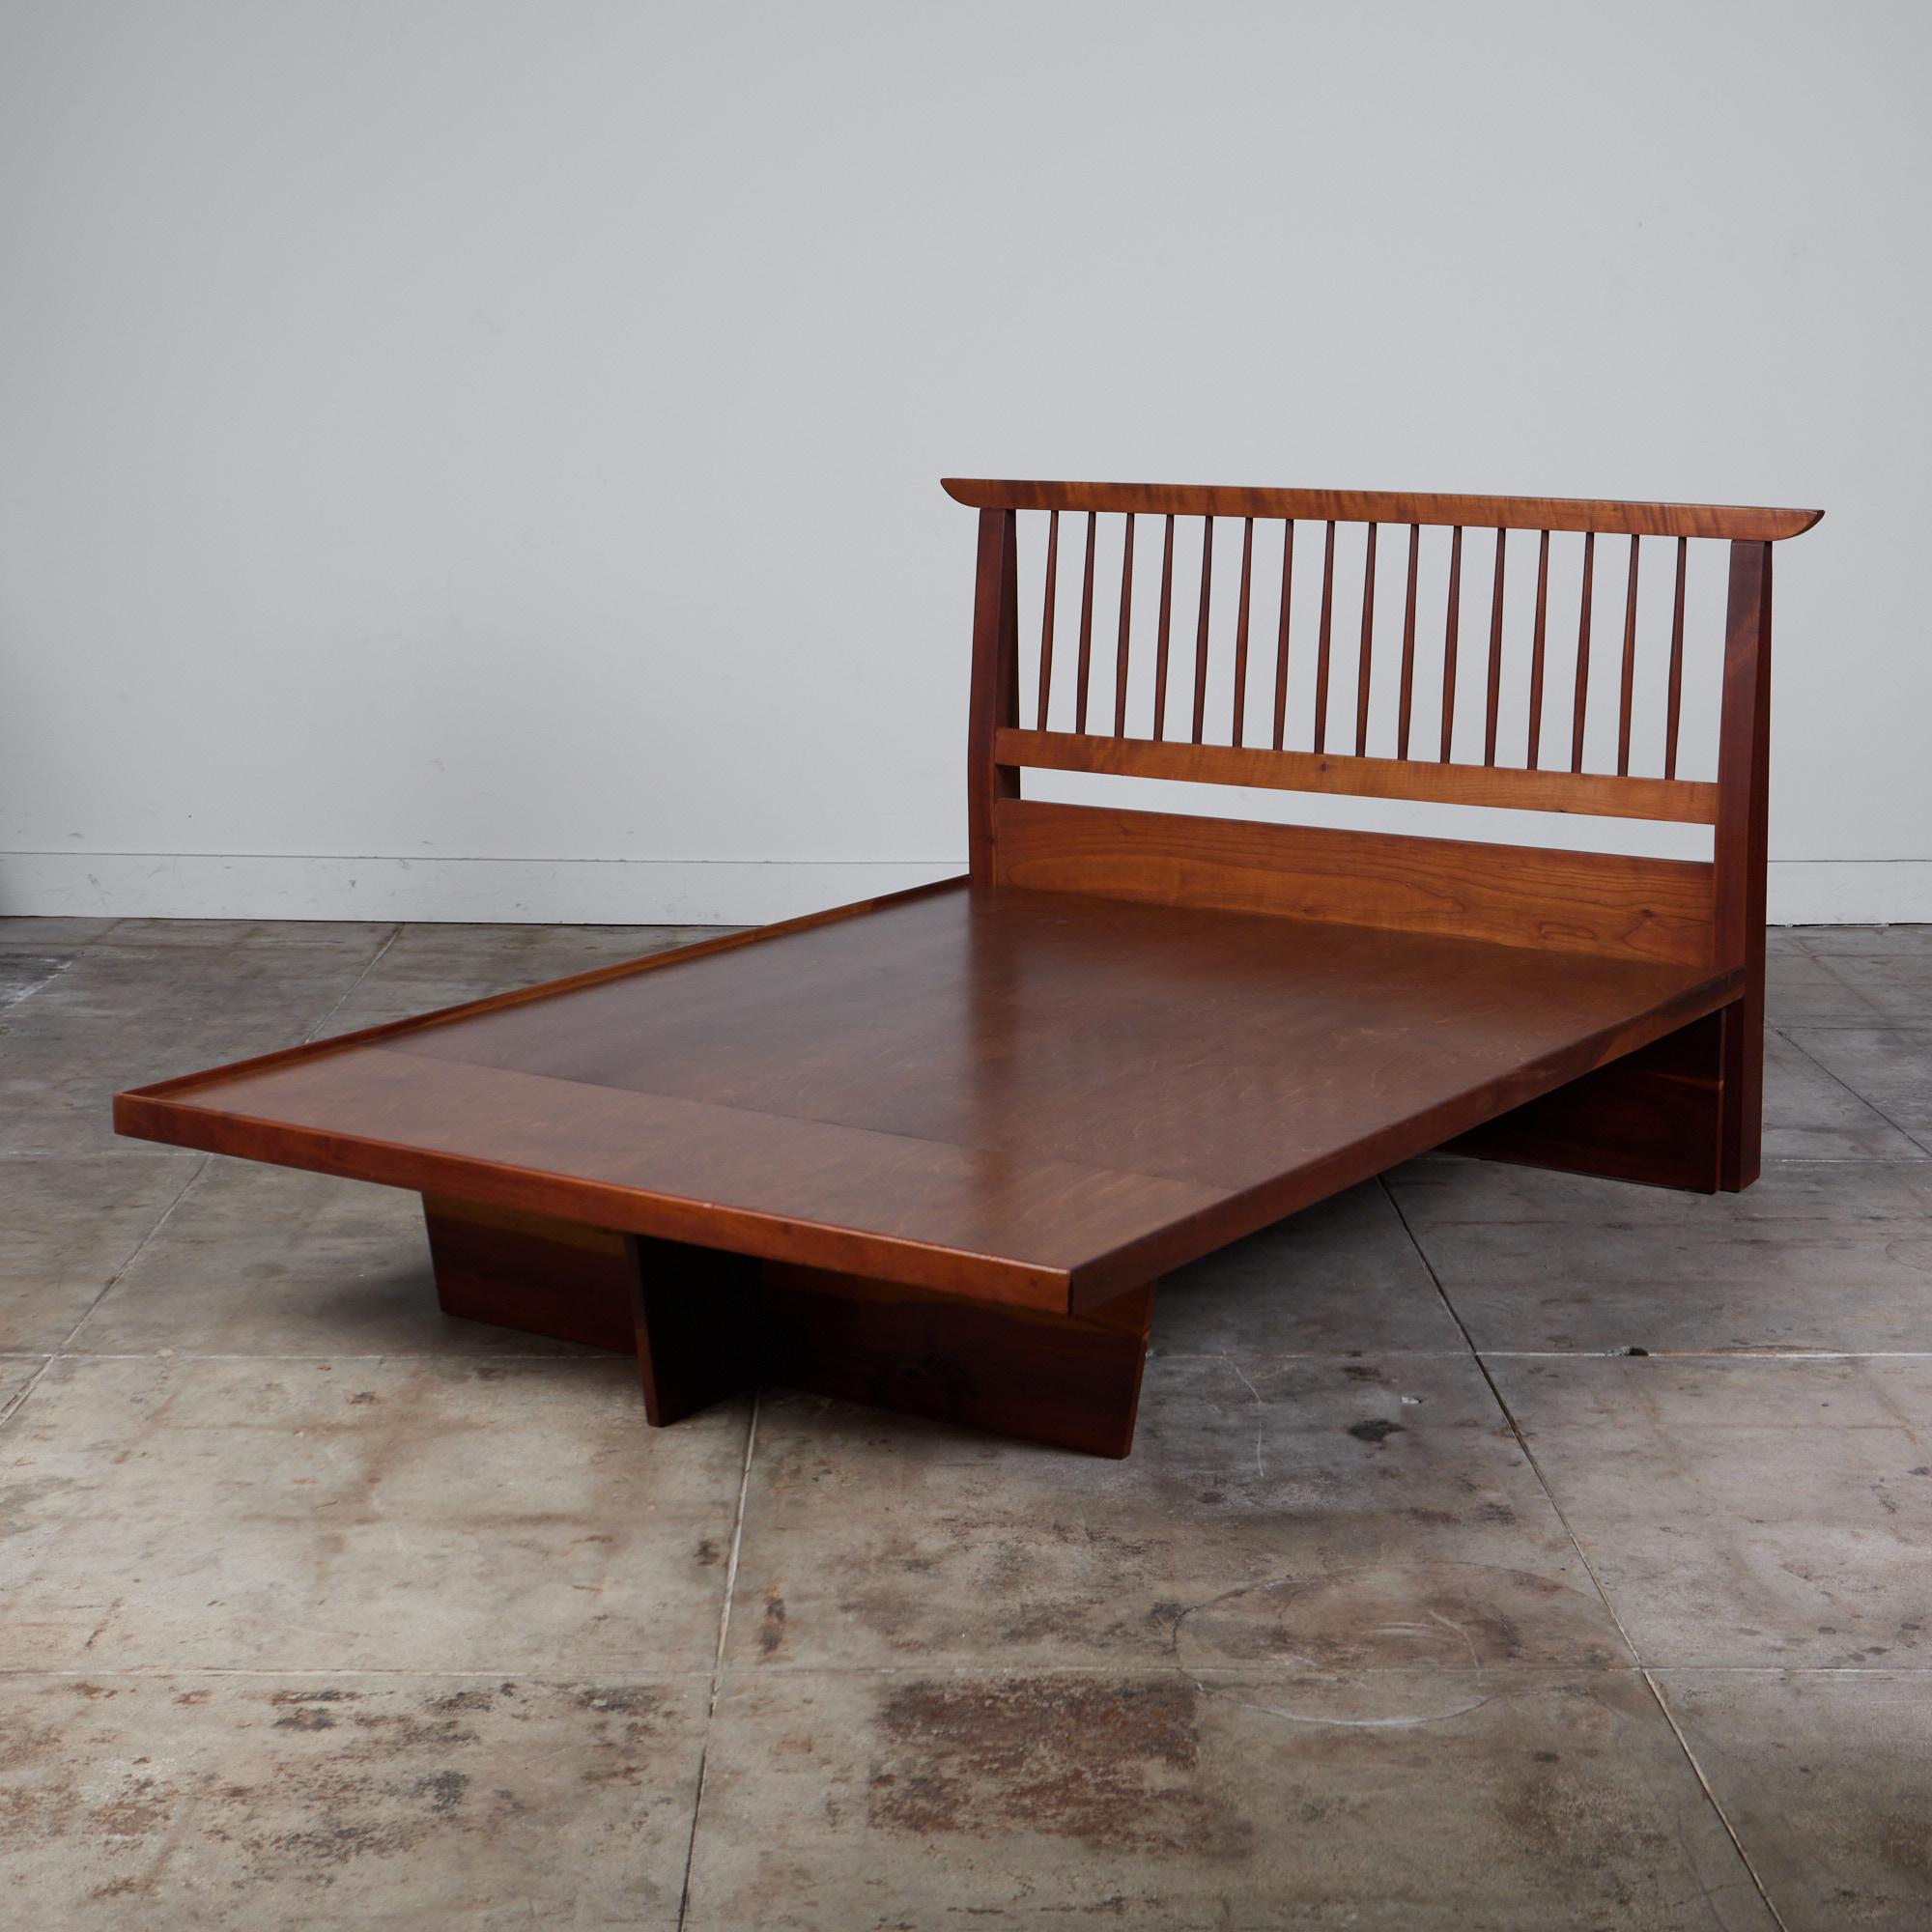 Platform bed by George Nakashima. This frame made from solid black walnut features a spindle headboard and platform base for a full size mattress.

Base has been modified by previous owner. Original base was a full box